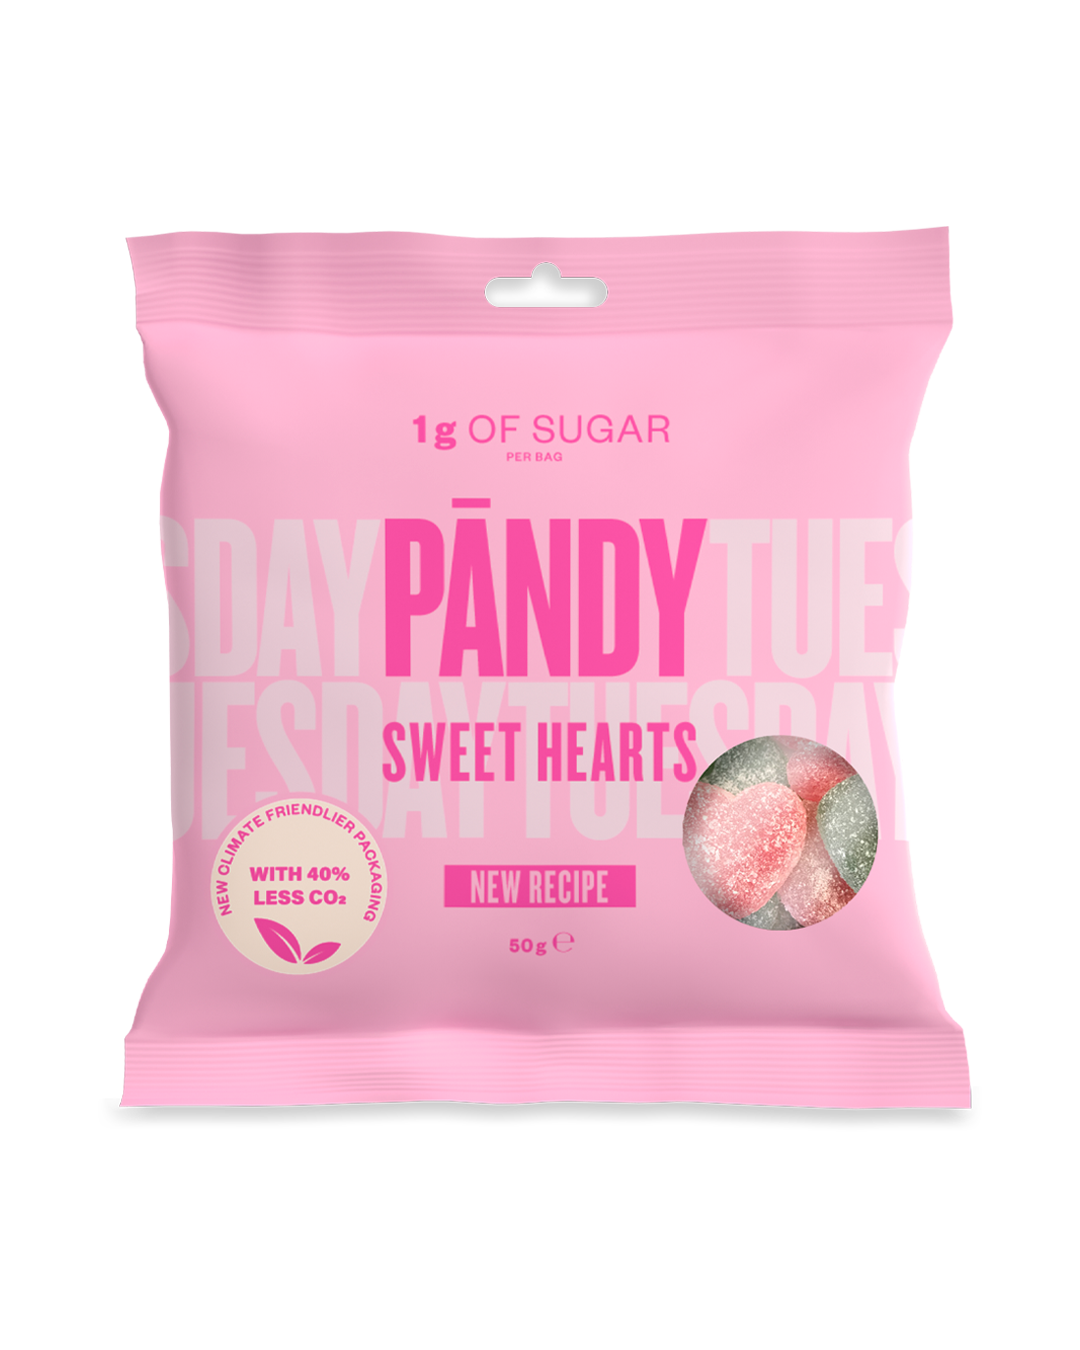 Pändy Candy Sweet Hearts